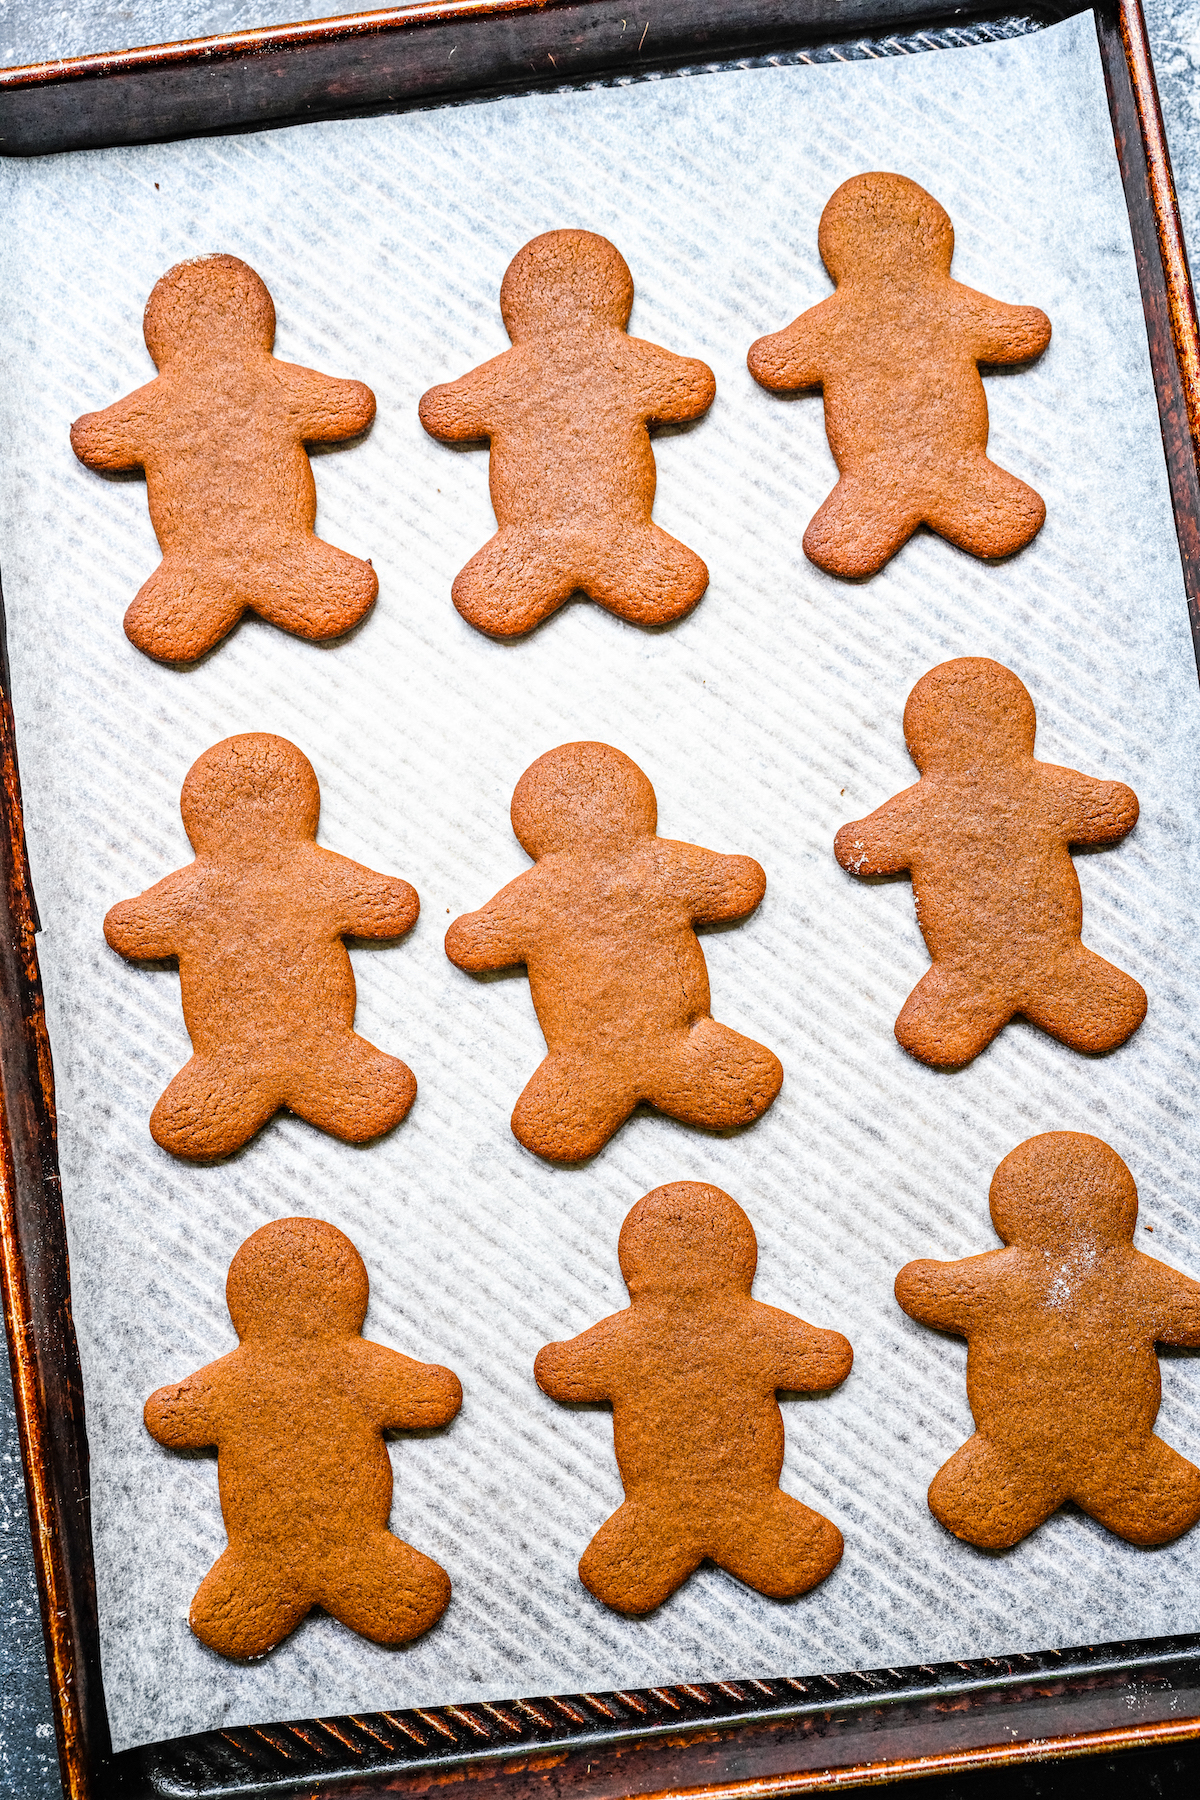 Baked gingerbread man cookies on a baking sheet.